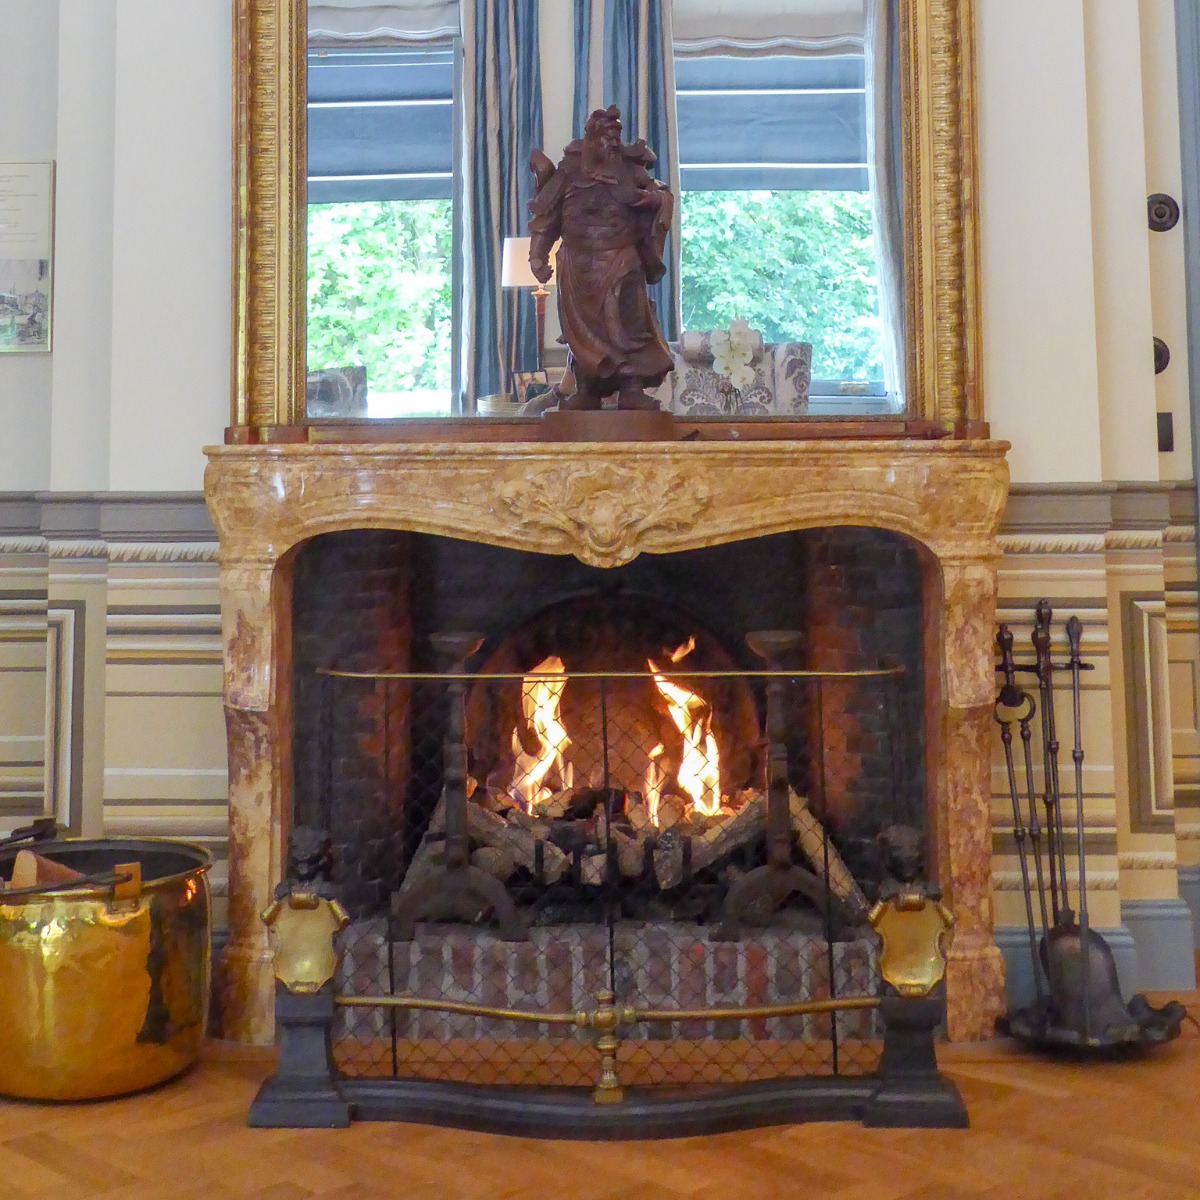 Gas fireplace decorated as wood-burning fireplace with antique andir

ons